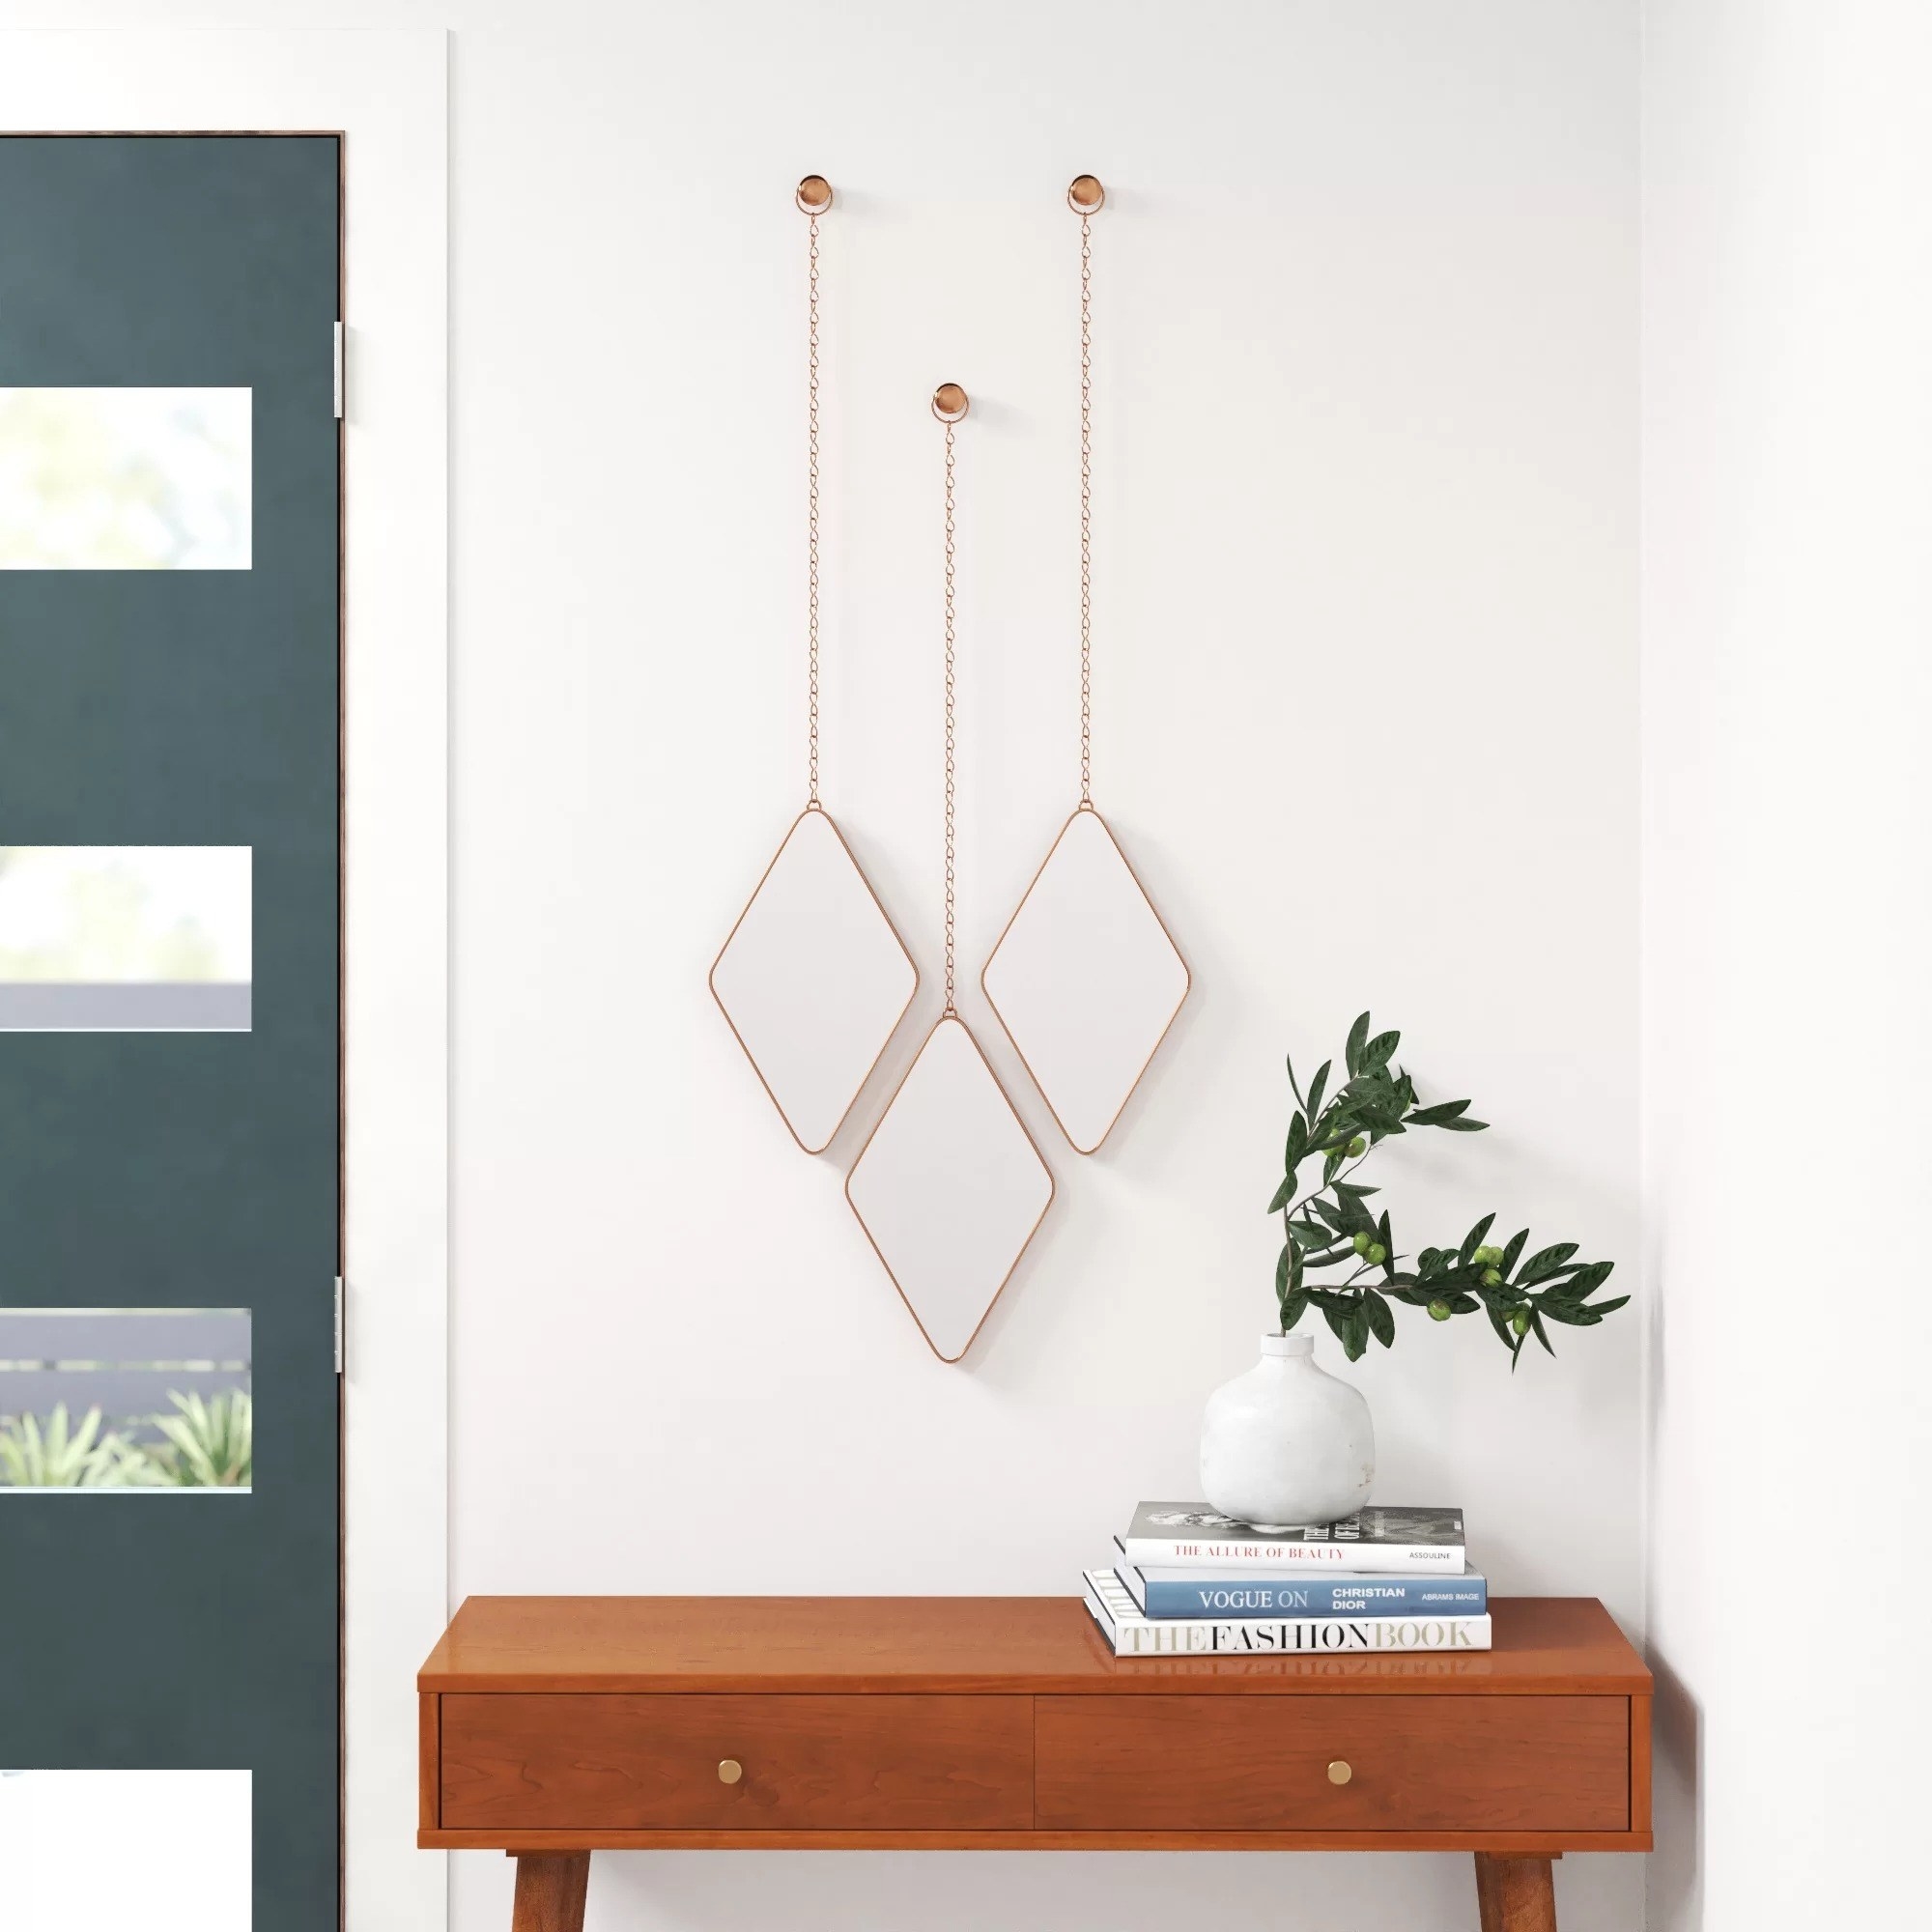 the copper mirrors hanging in an entryway